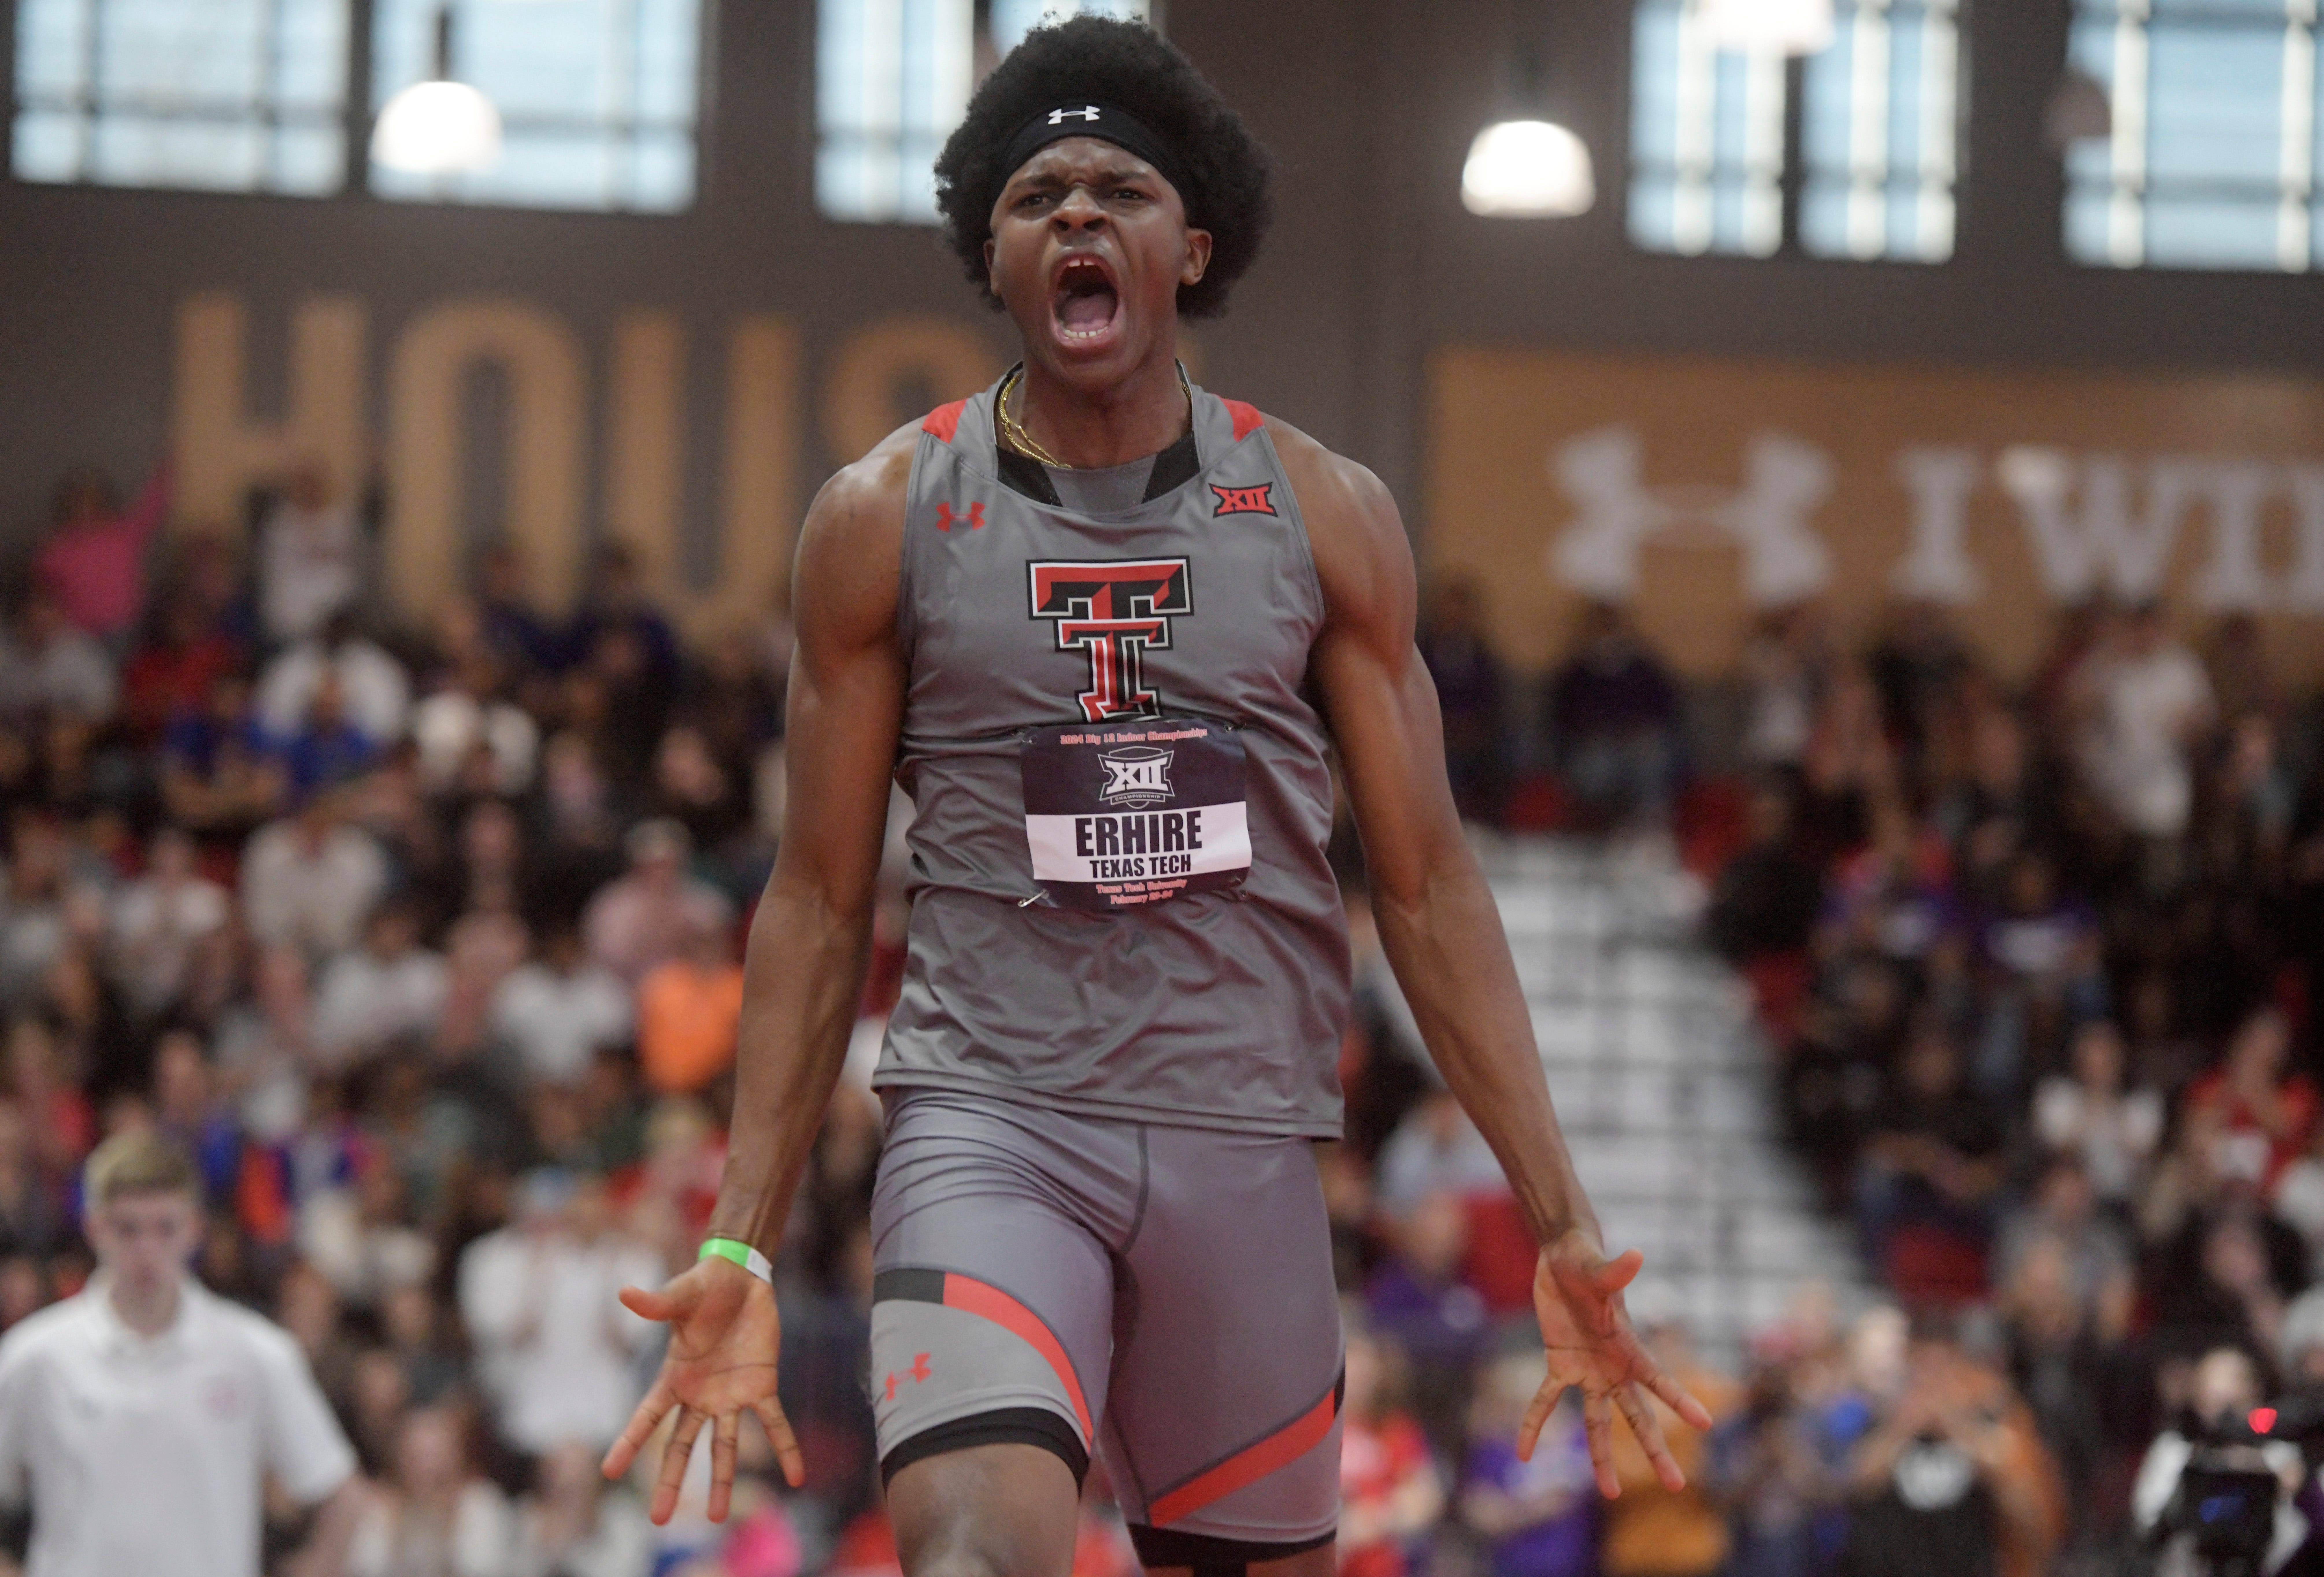 Texas Tech track and field starts quest for fourth straight men's Big 12 title